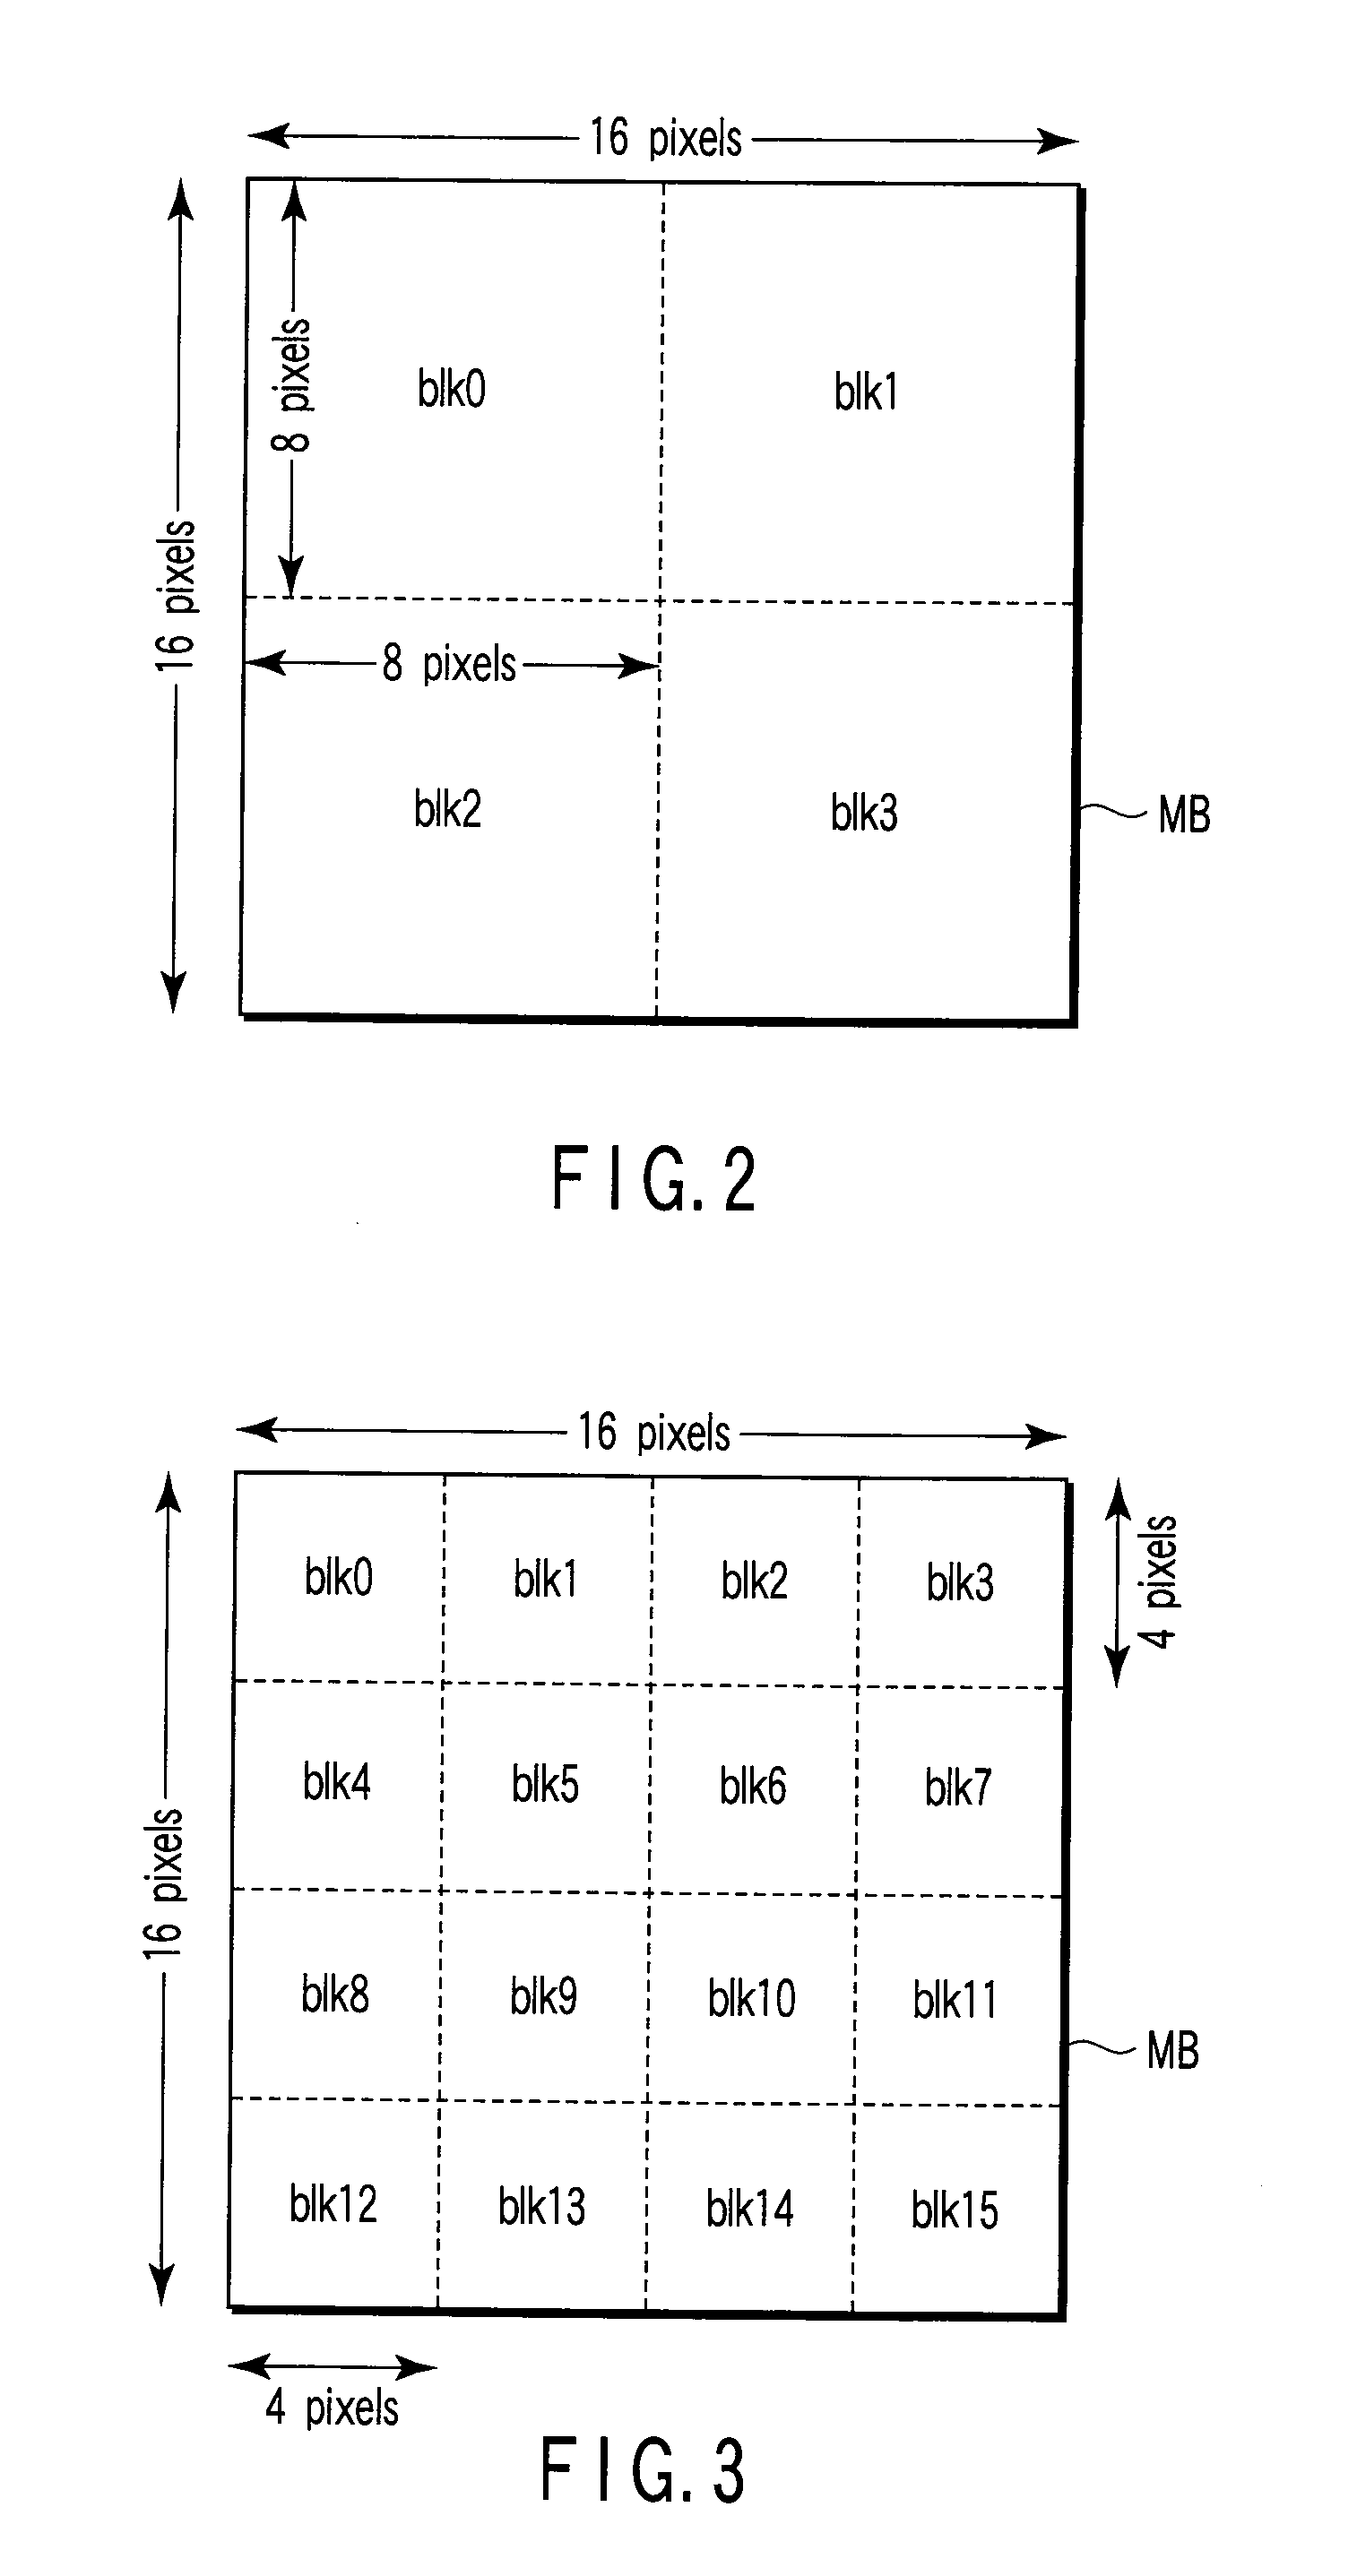 Moving picture coding apparatus and method